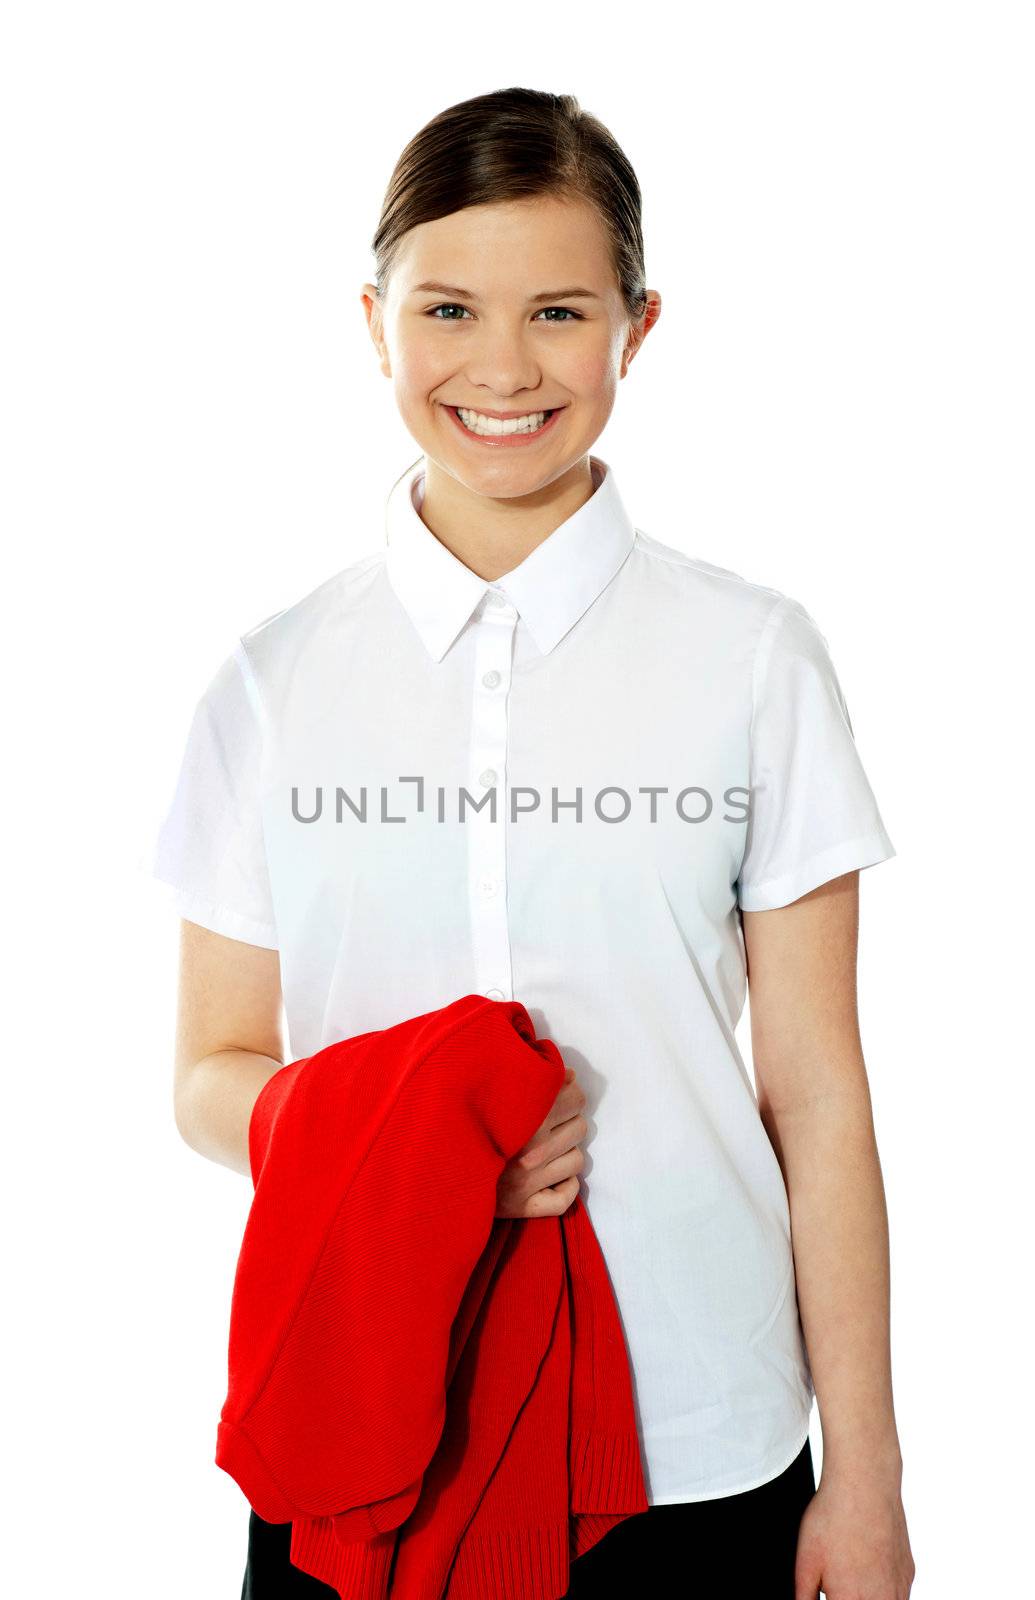 School girl holding her red sweater and smiling, isolated on white background